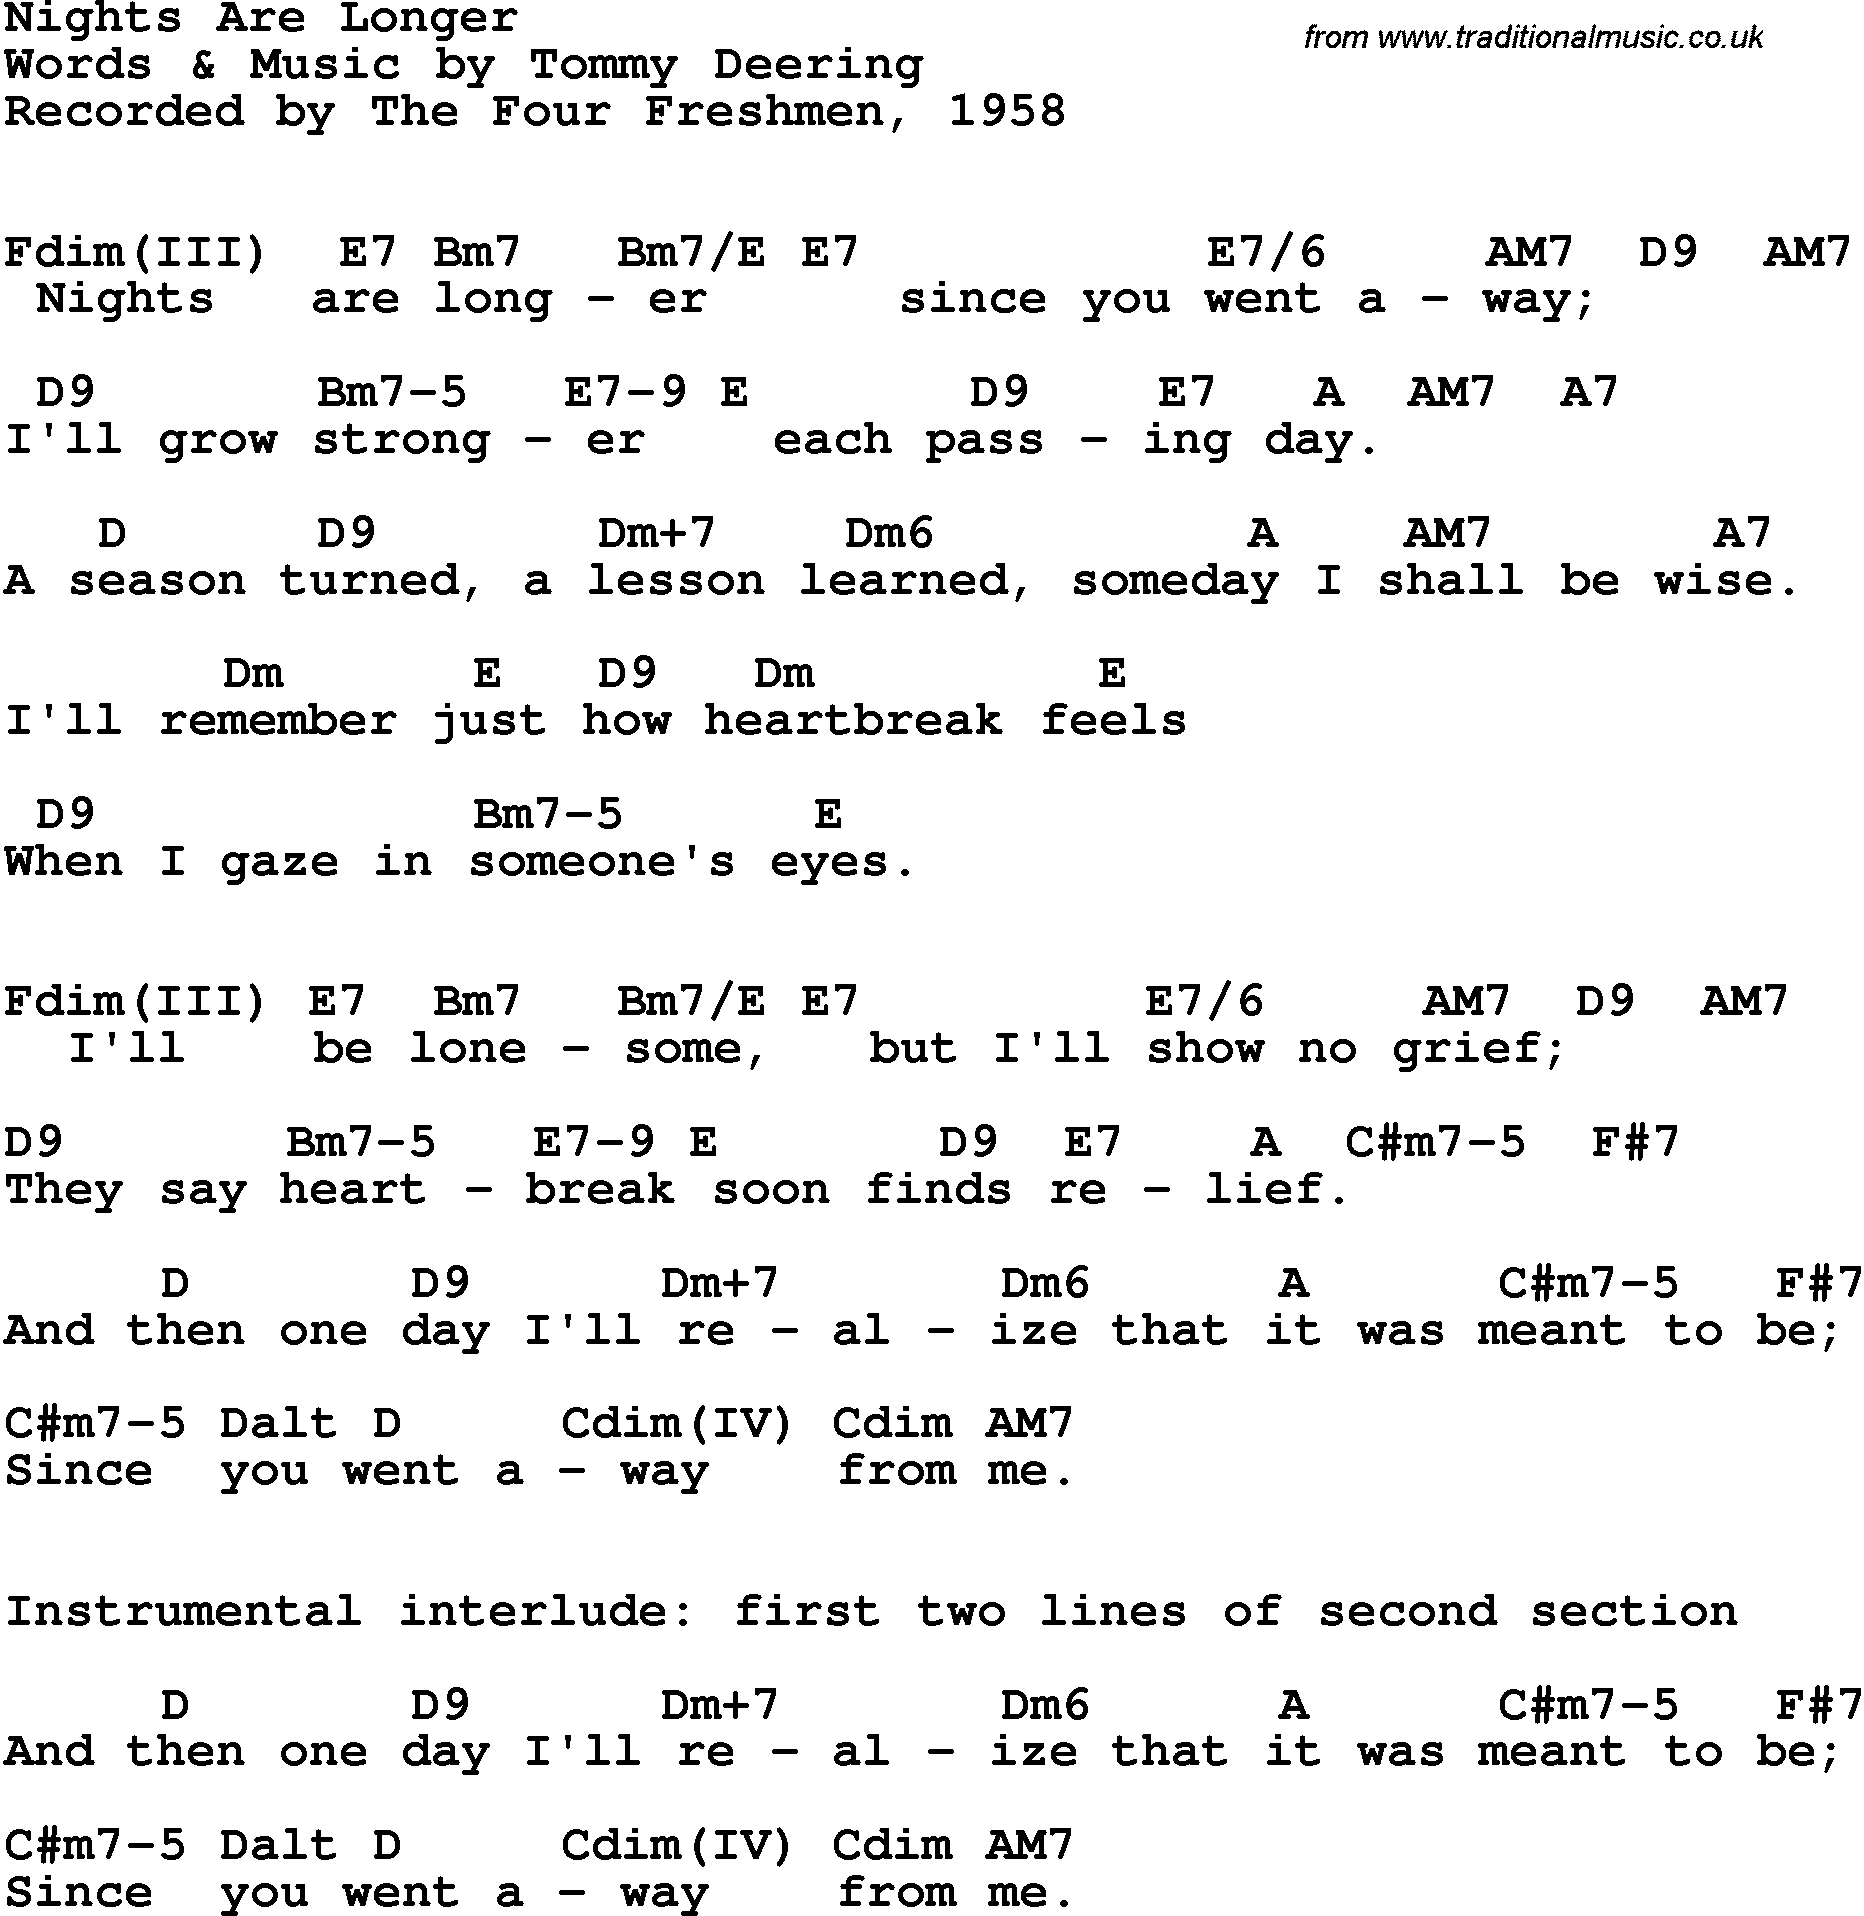 Song Lyrics with guitar chords for Nights Are Longer - Four Freshmen, 1958